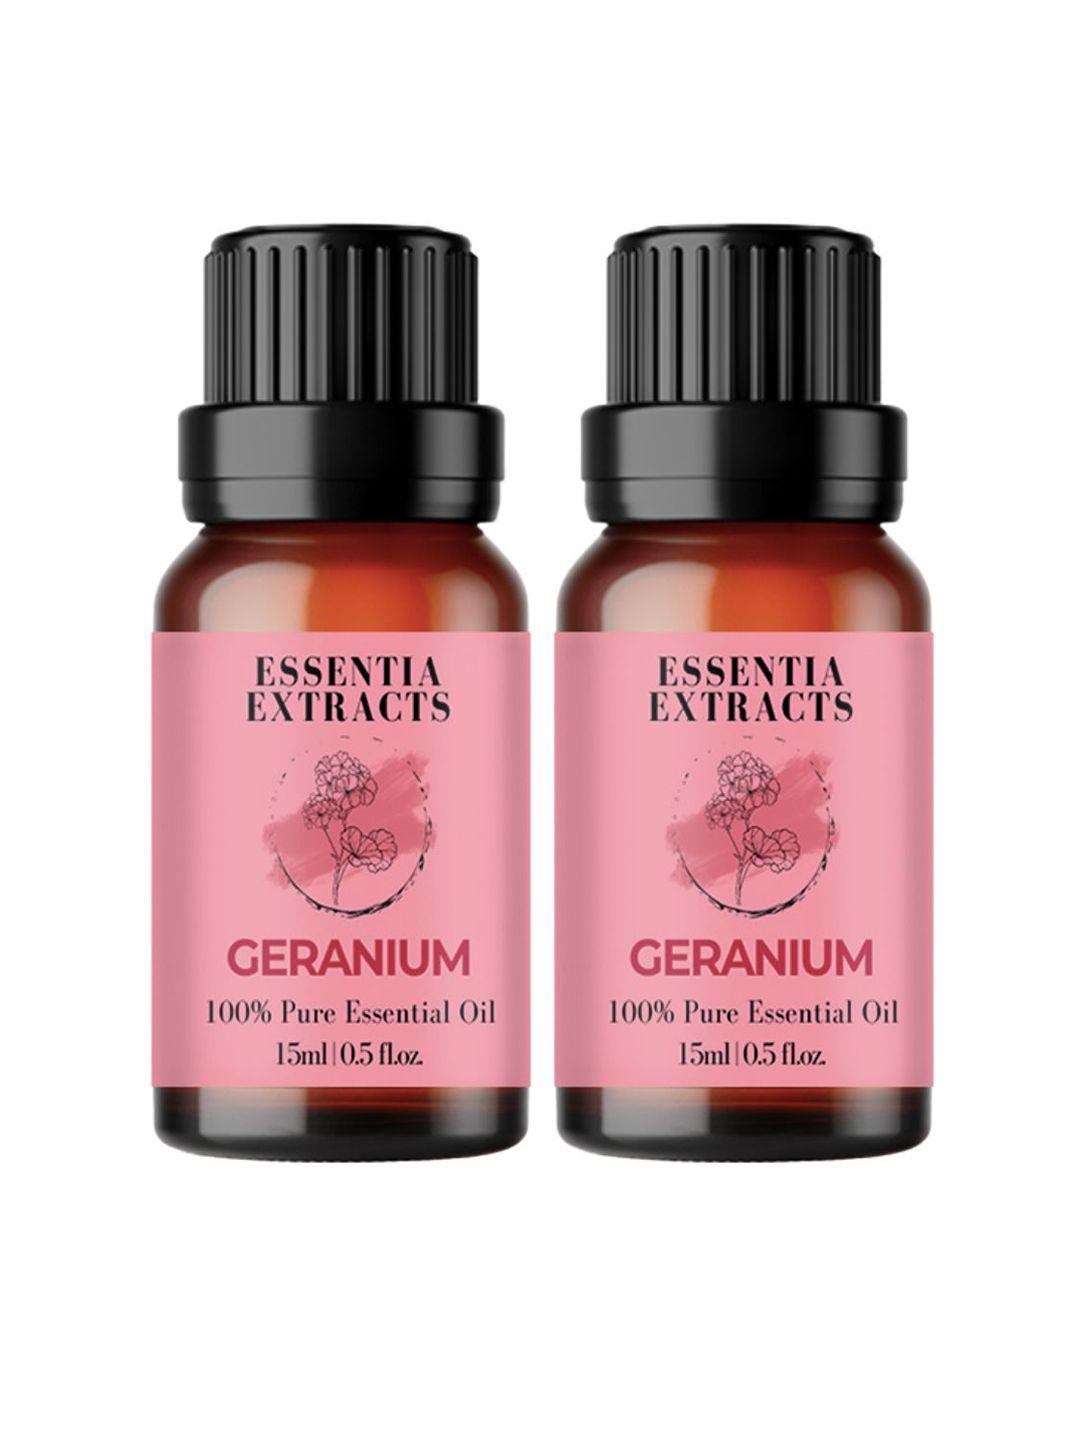 essentia-extracts-set-of-2-pure-geranium-essential-oils-to-fight-acne-breakouts--15ml-each